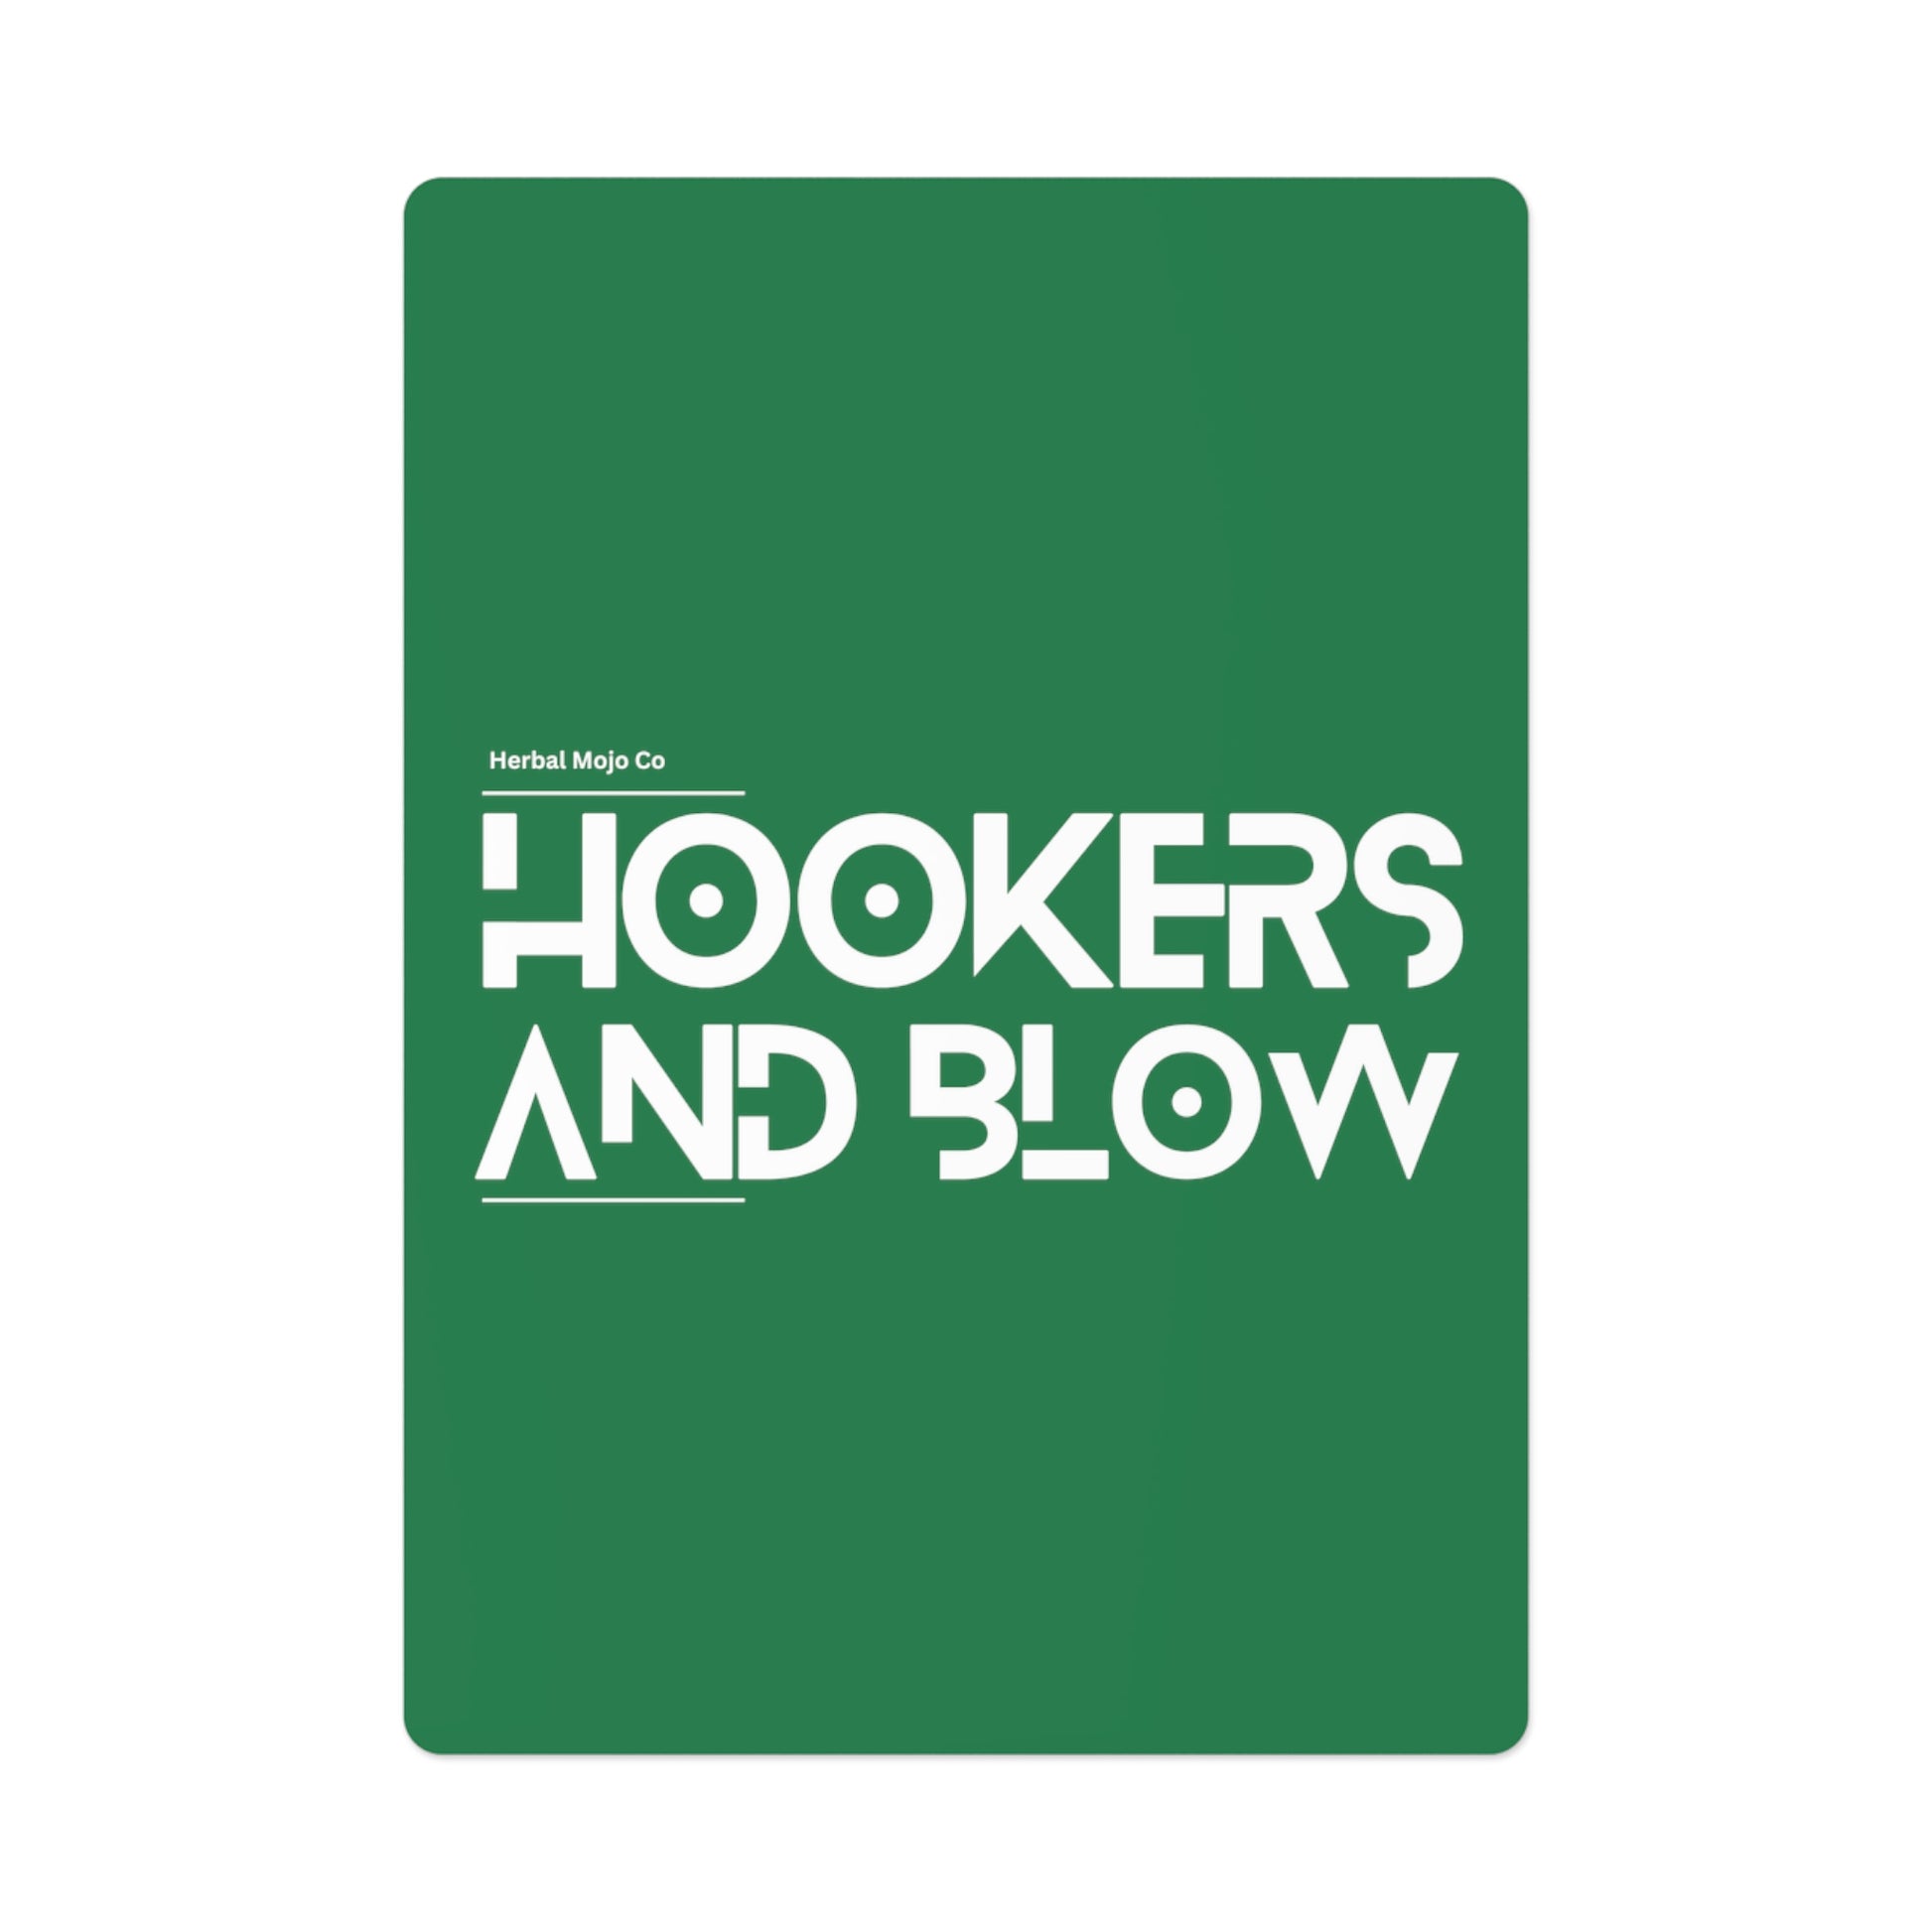 Stamina for Men Hookers & Blow poker cards product shot with white background